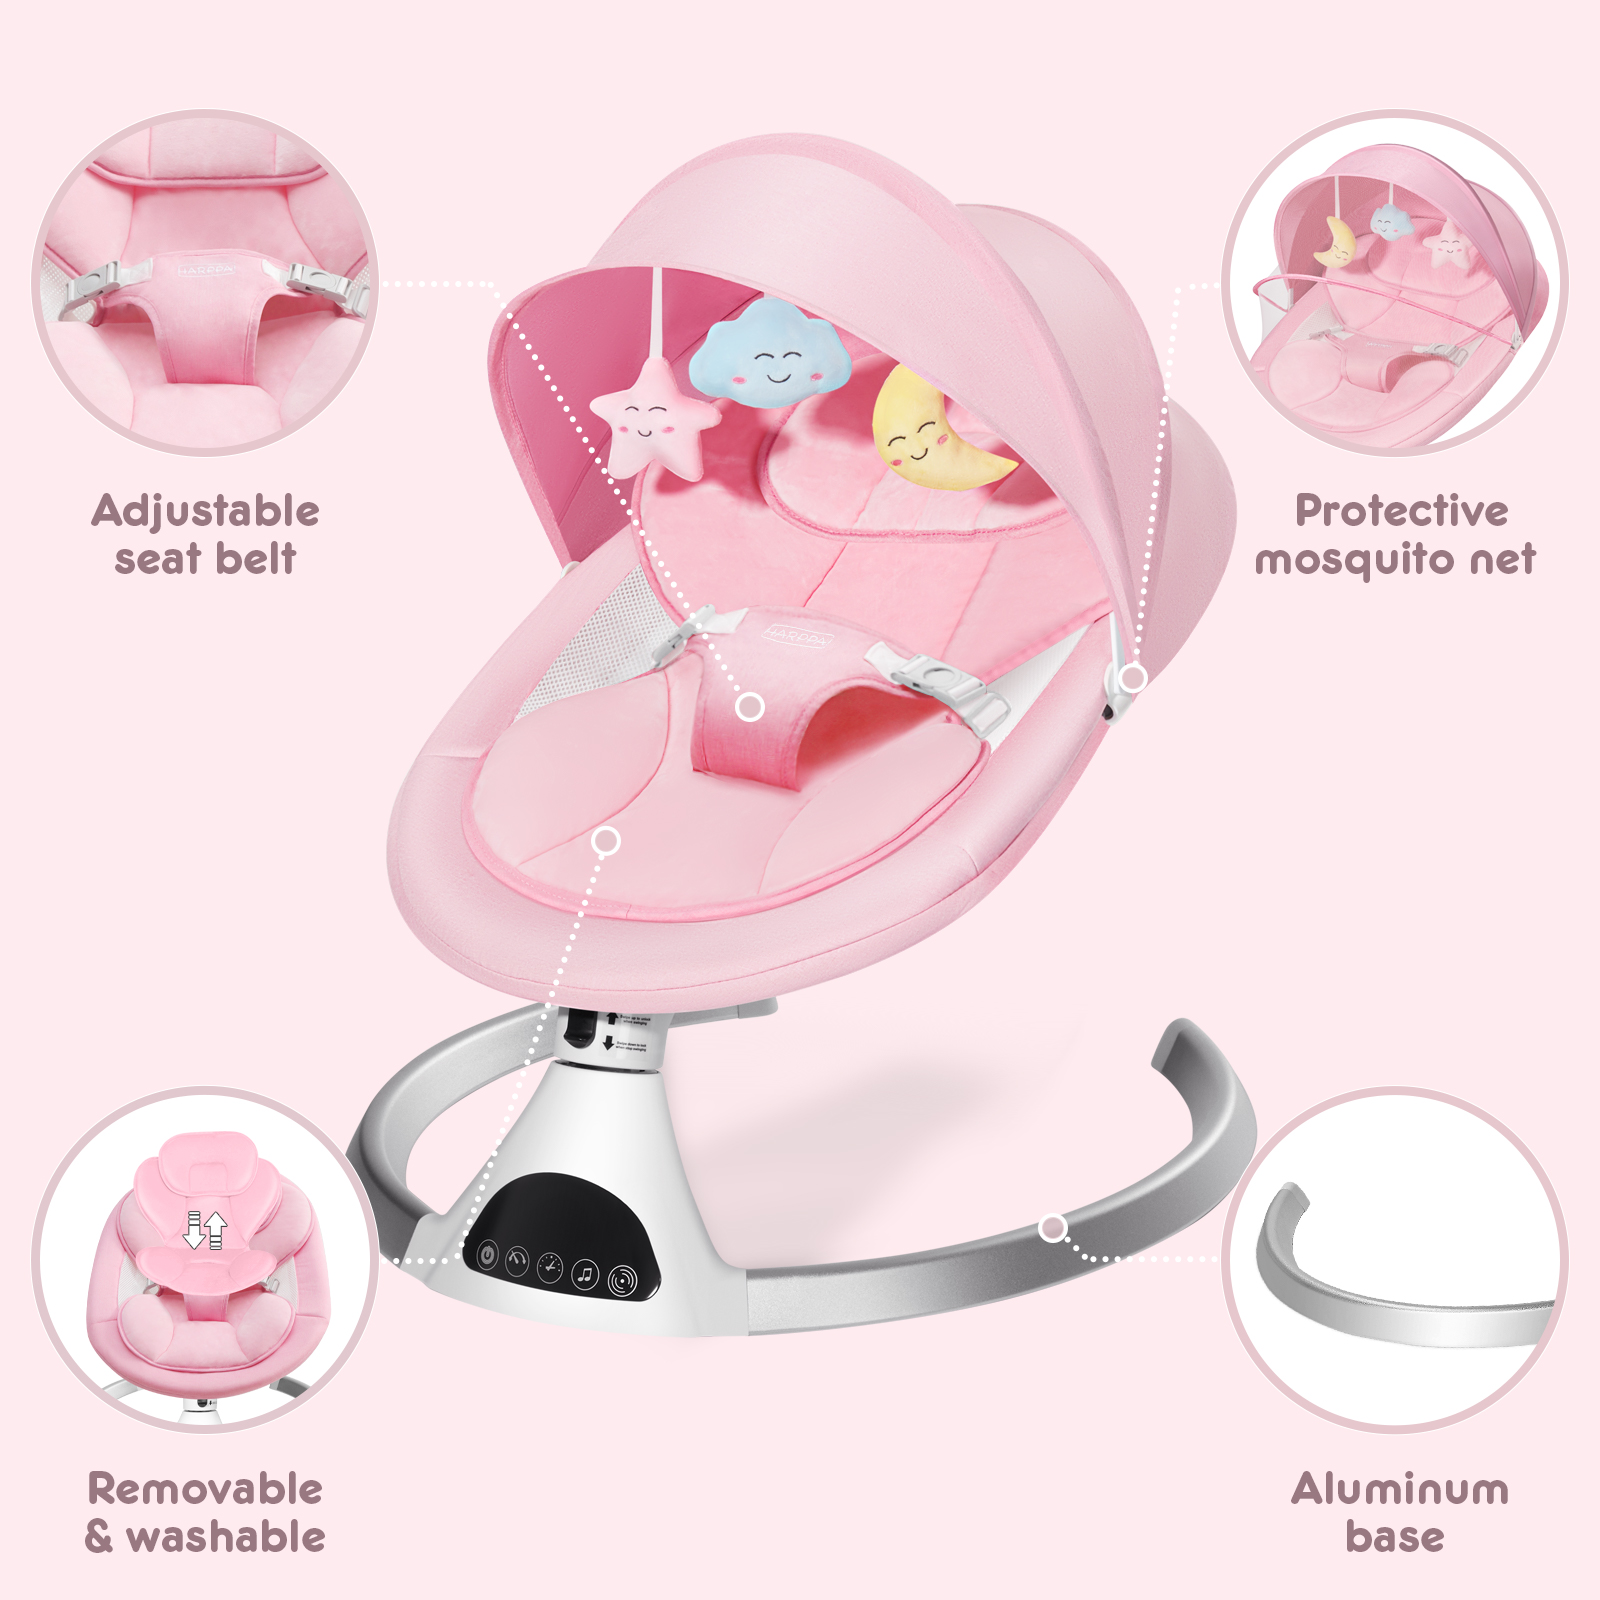 HARPPA Electric Baby Swing, Bluetooth Speaker, Remote Control, Pink - image 3 of 8